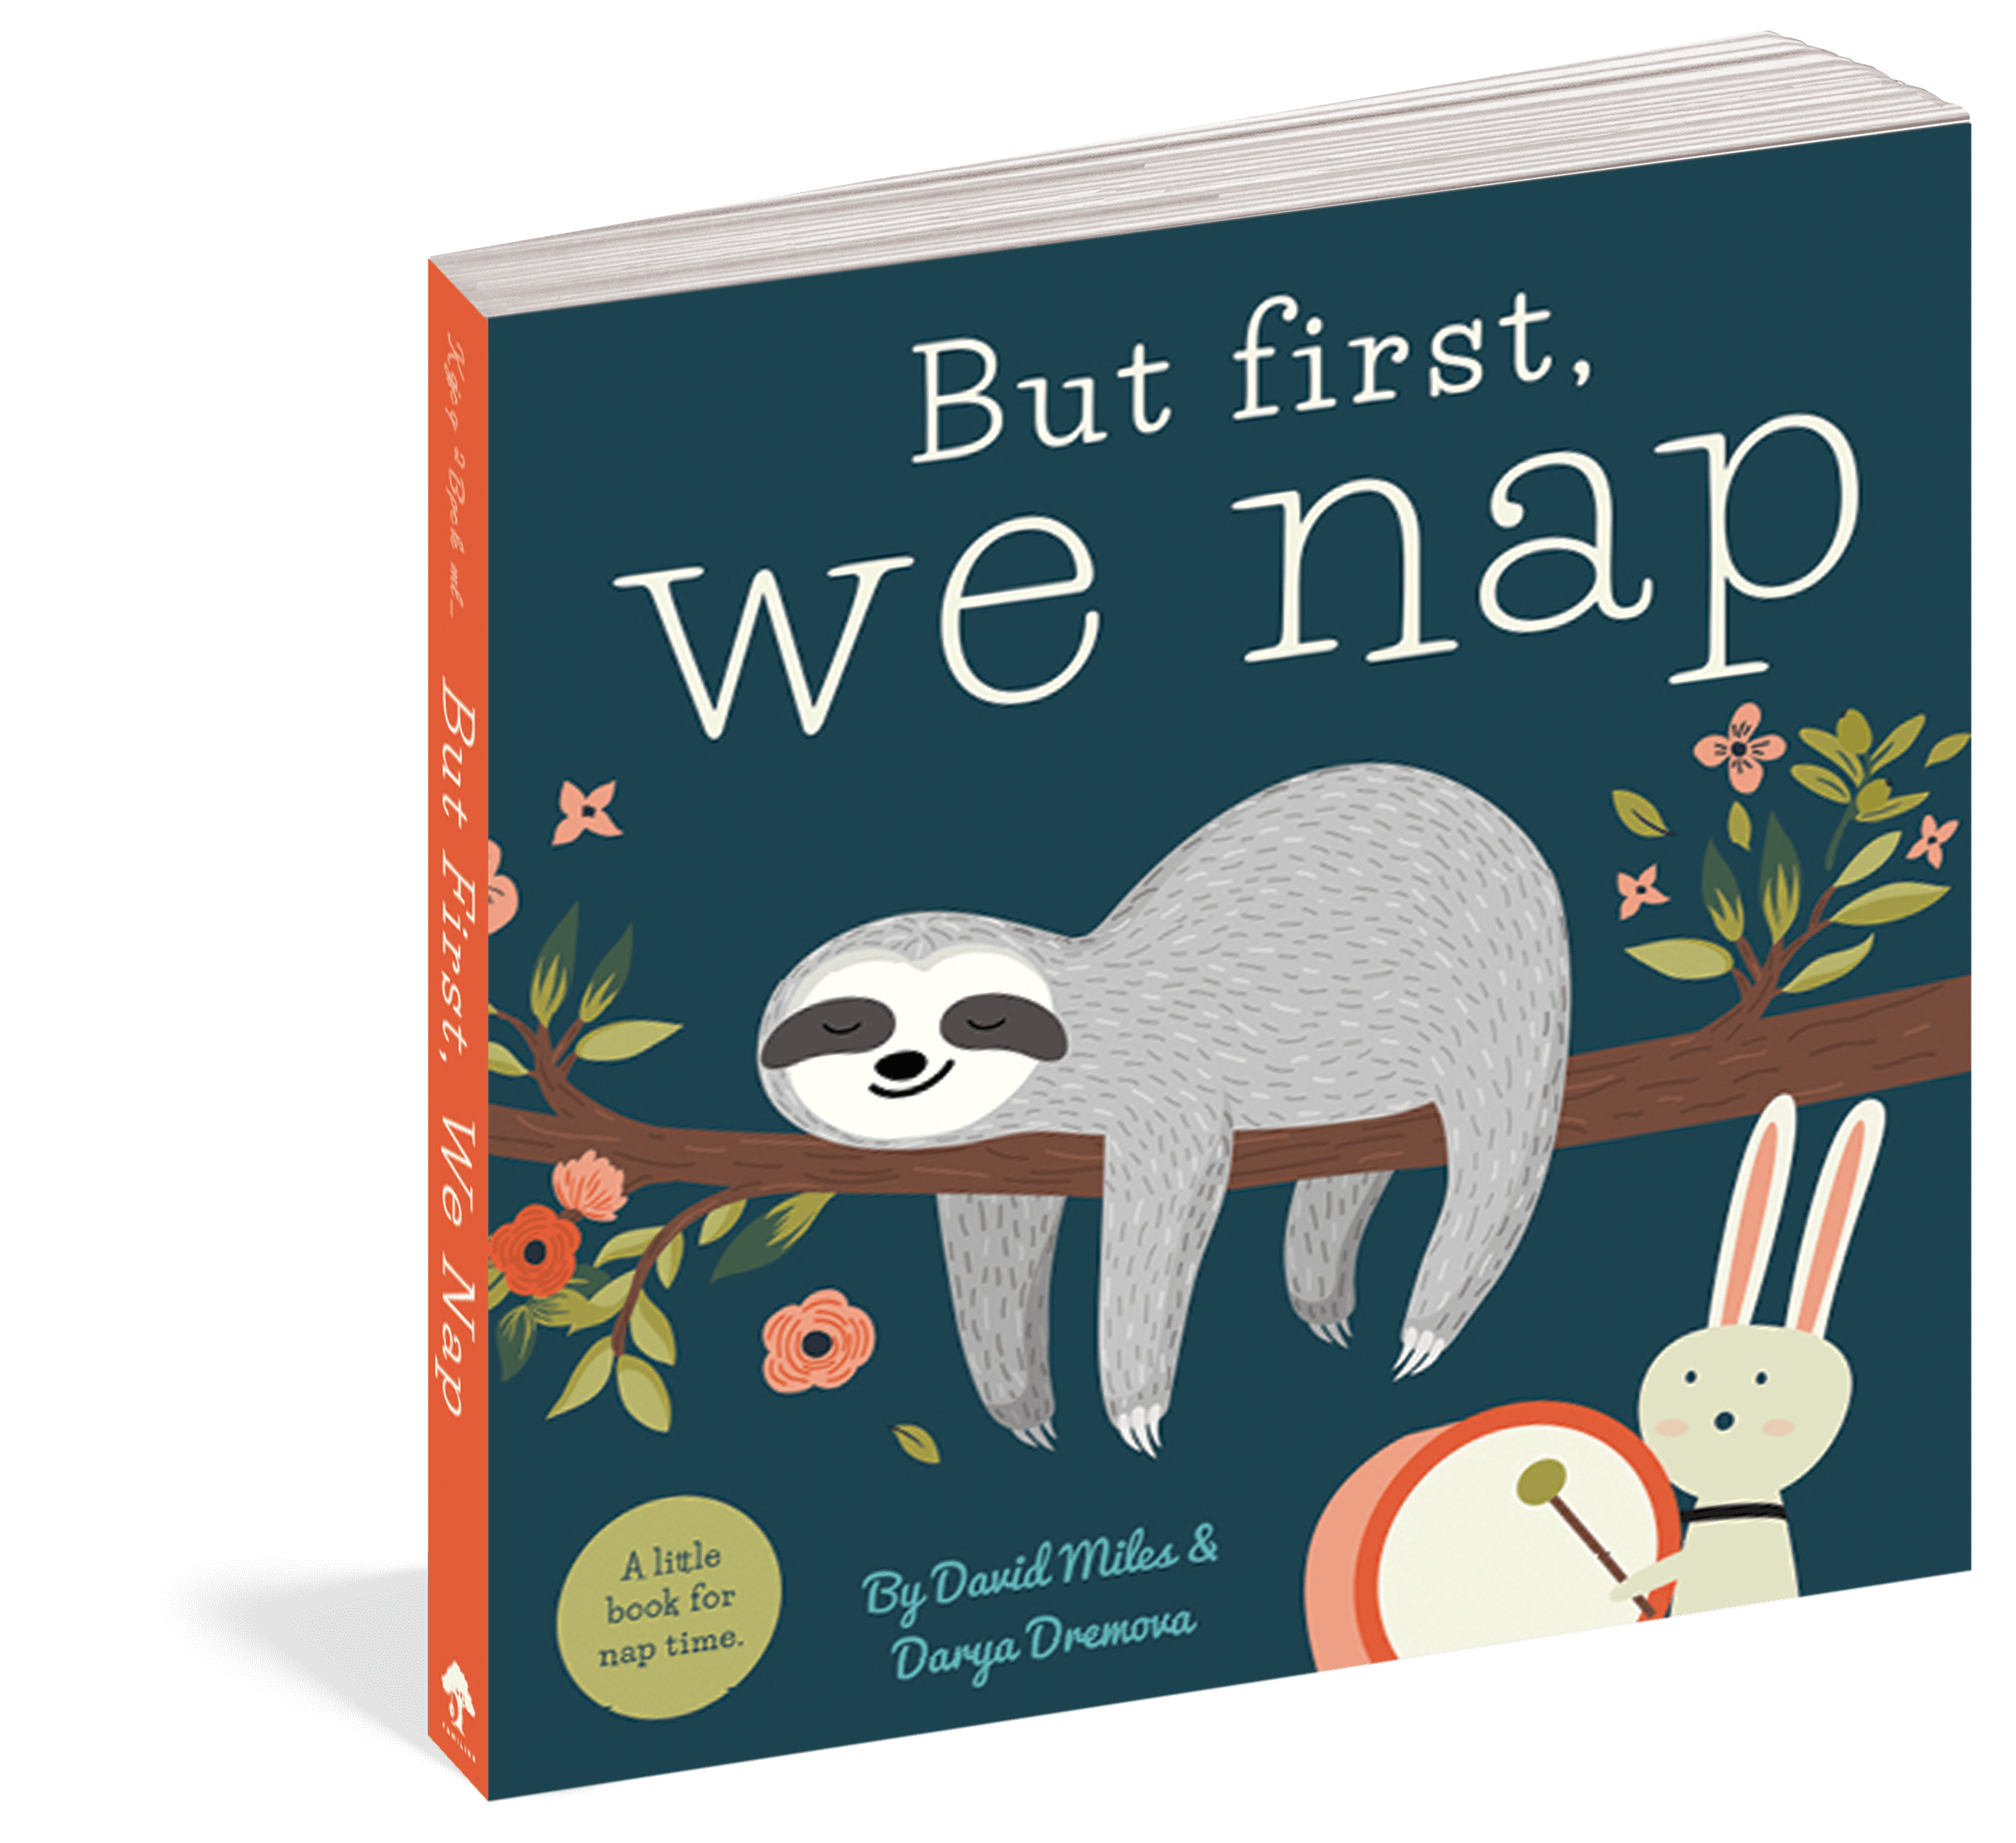 The cover of the board book But First, We Nap.